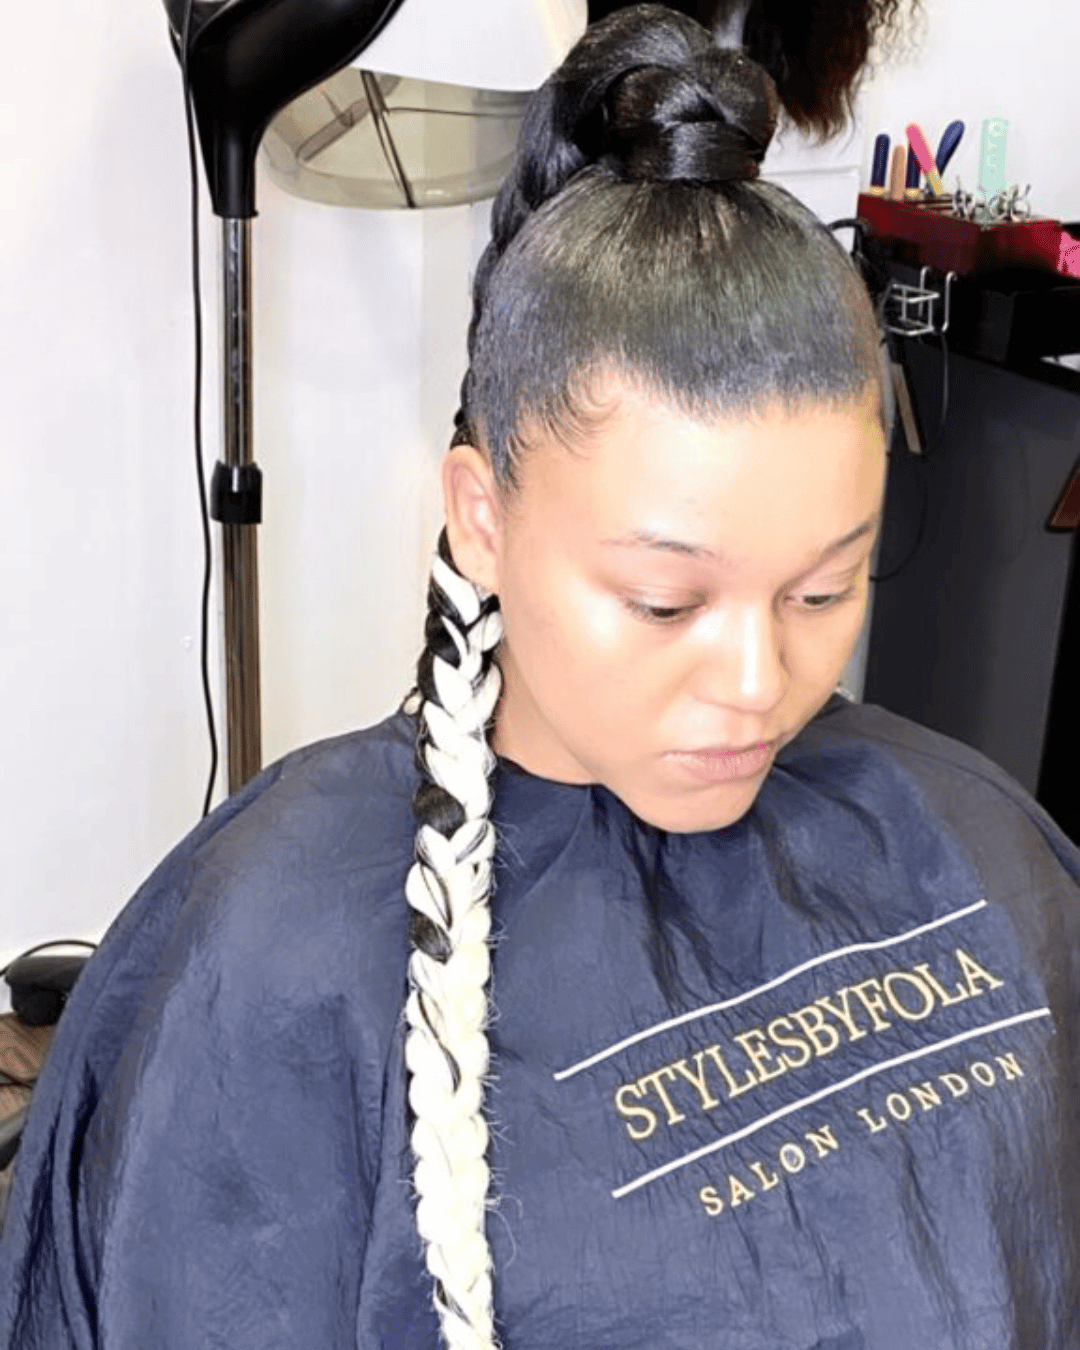 How to get the perfect sleek ponytail - Styling tips from Chris Appleton